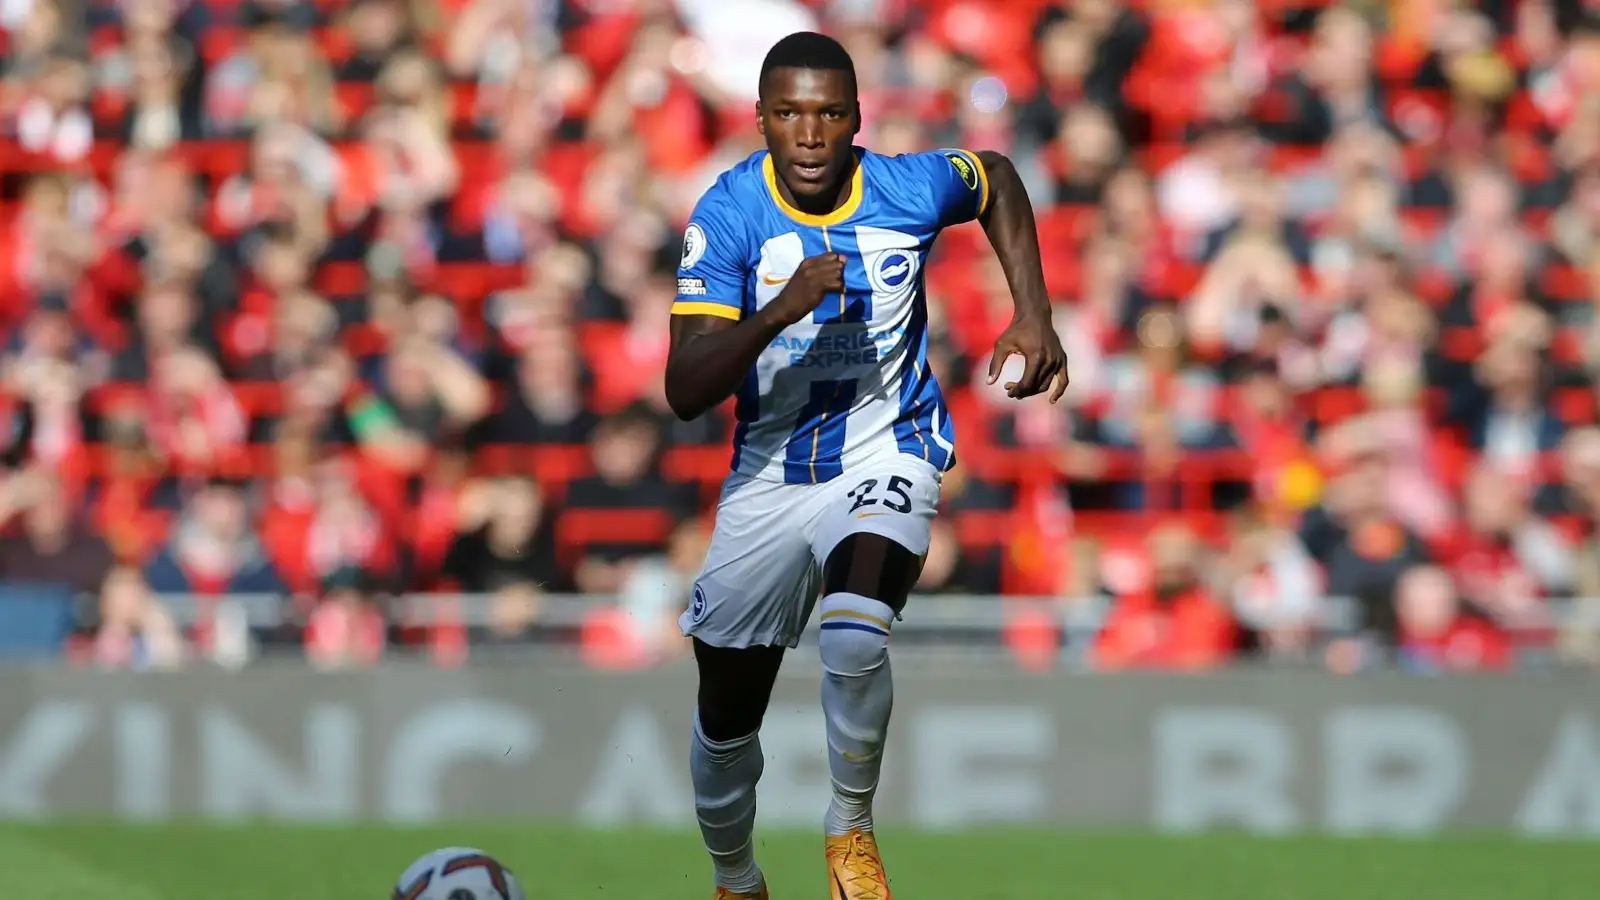 Moises Caicedo during a game against Liverpool